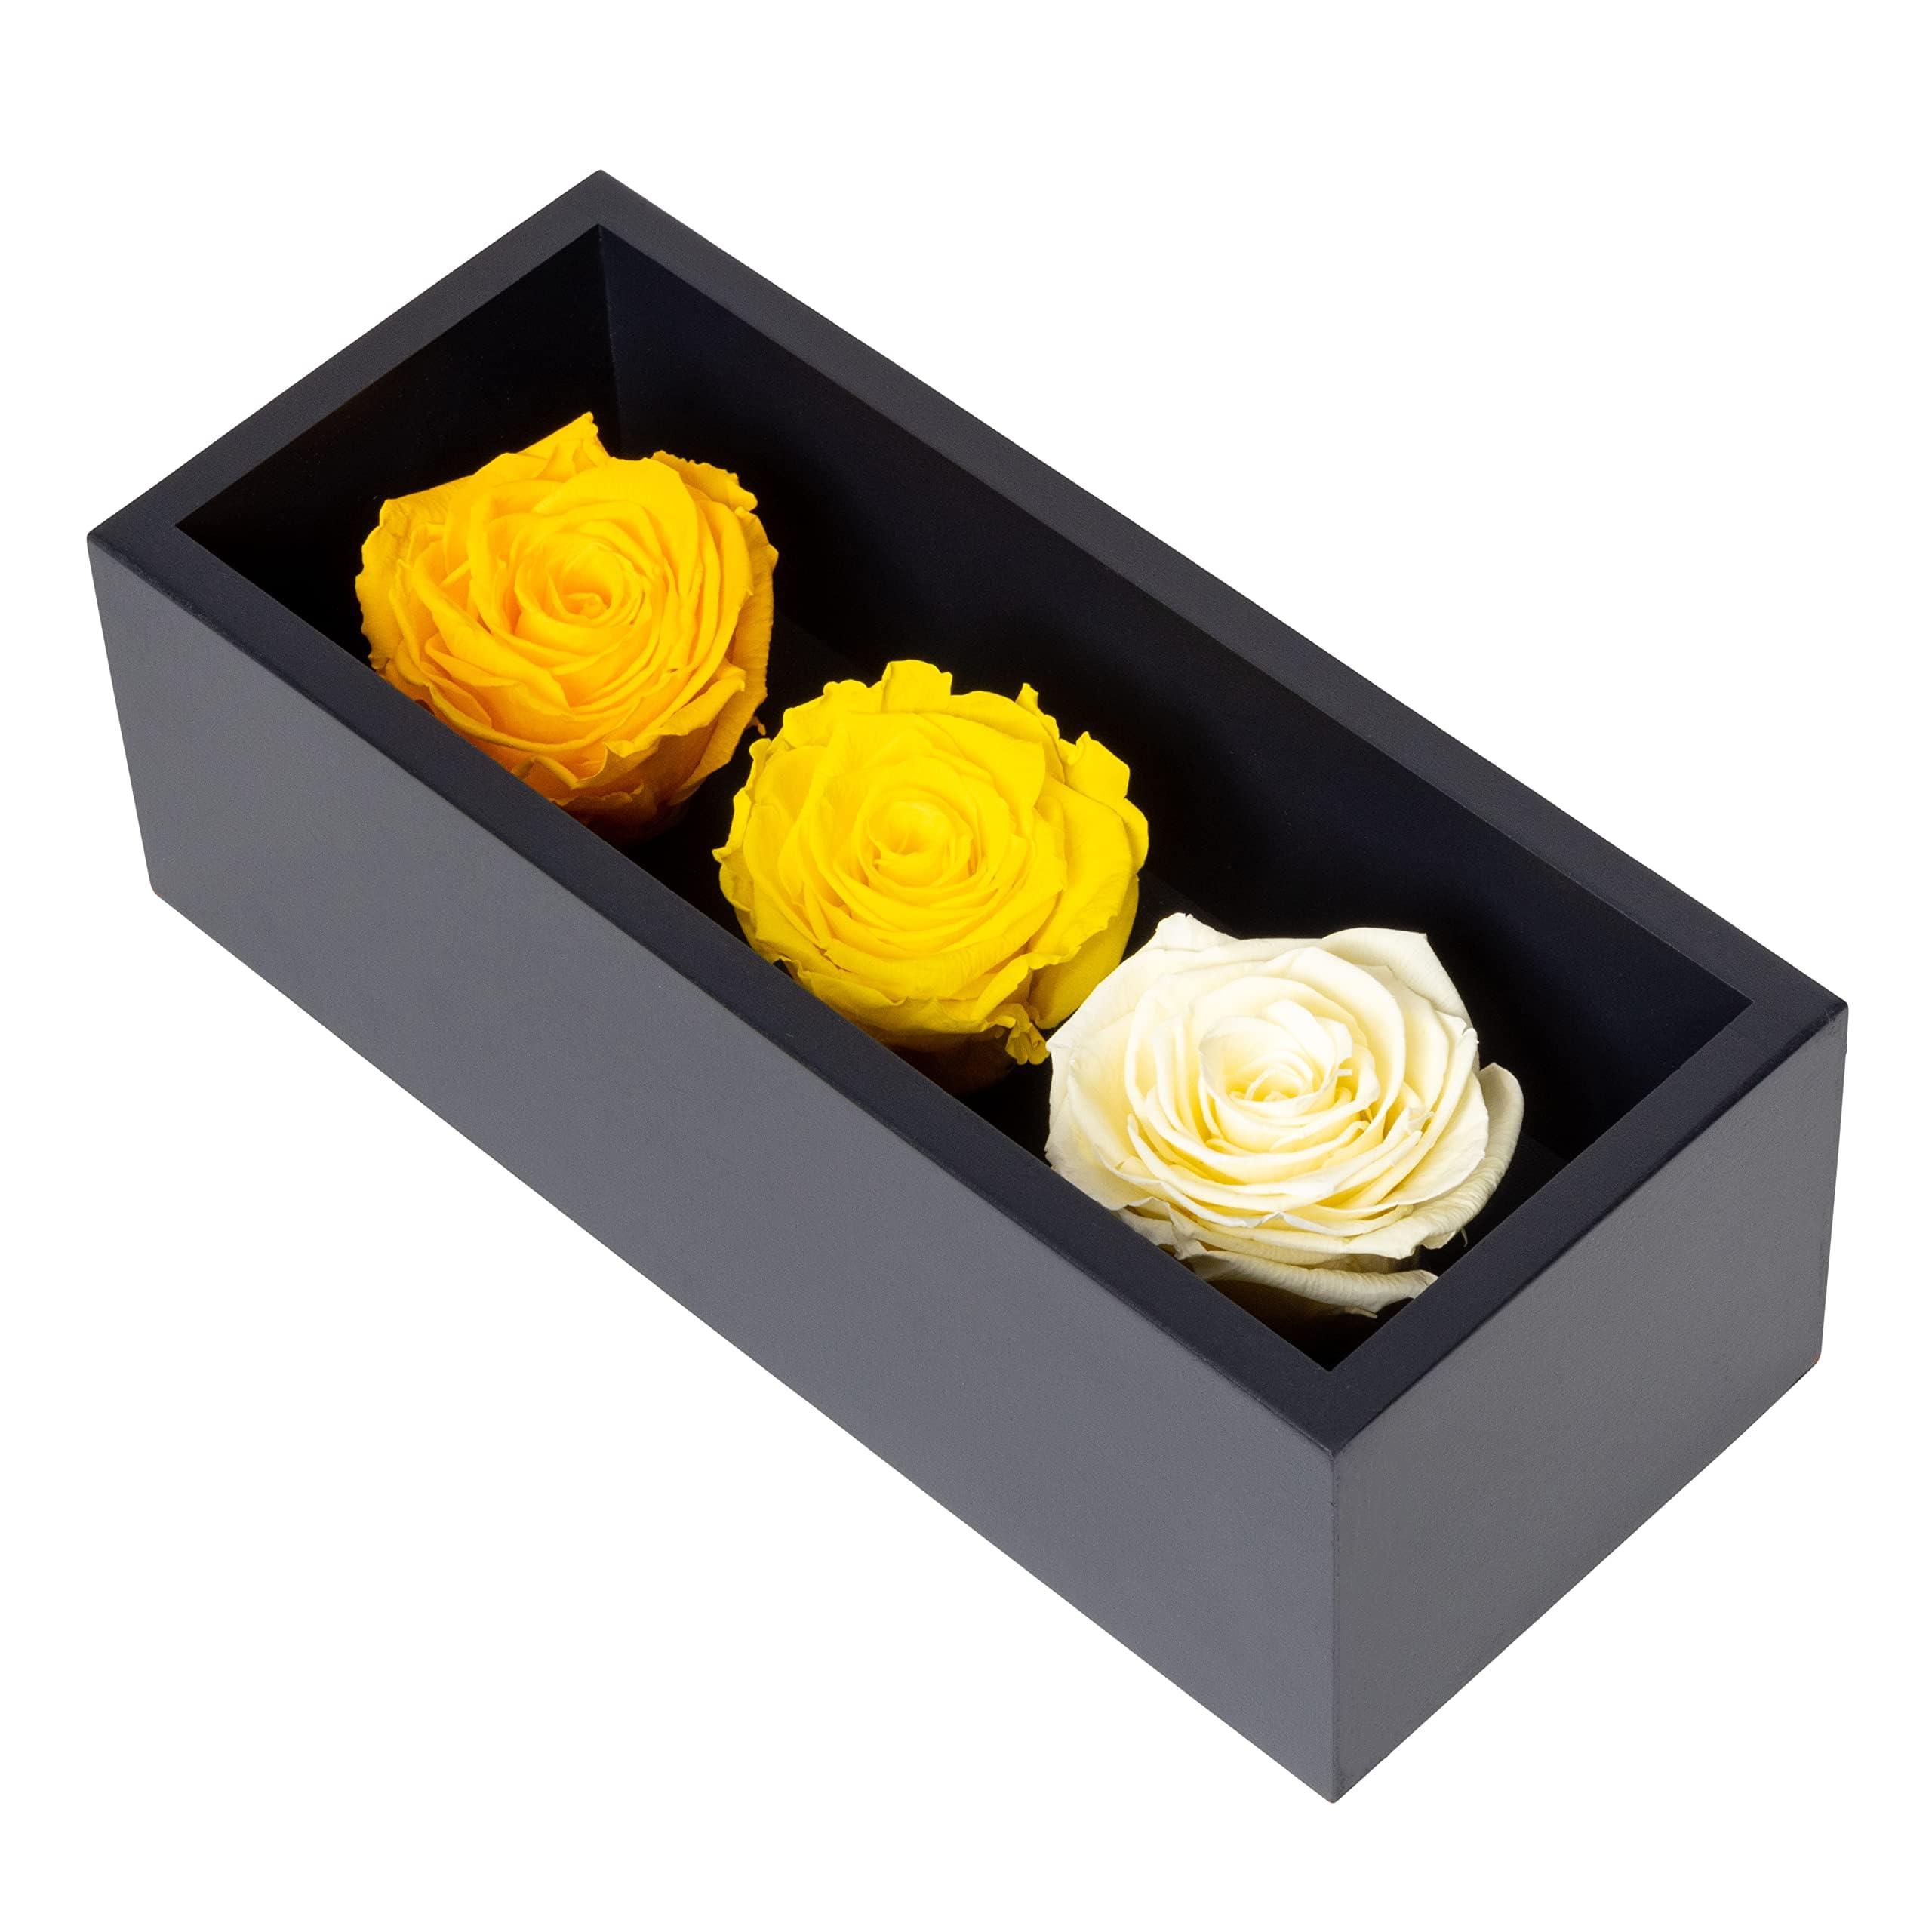 Khiva Graduation Preserved Roses in Wood Box, 3 Yellow Birthday Flowers for Delivery Prime, Everlasting Flowers, Natural Forever Roses That Last for Years, Eternal Rose, Gift Delivery for Mum